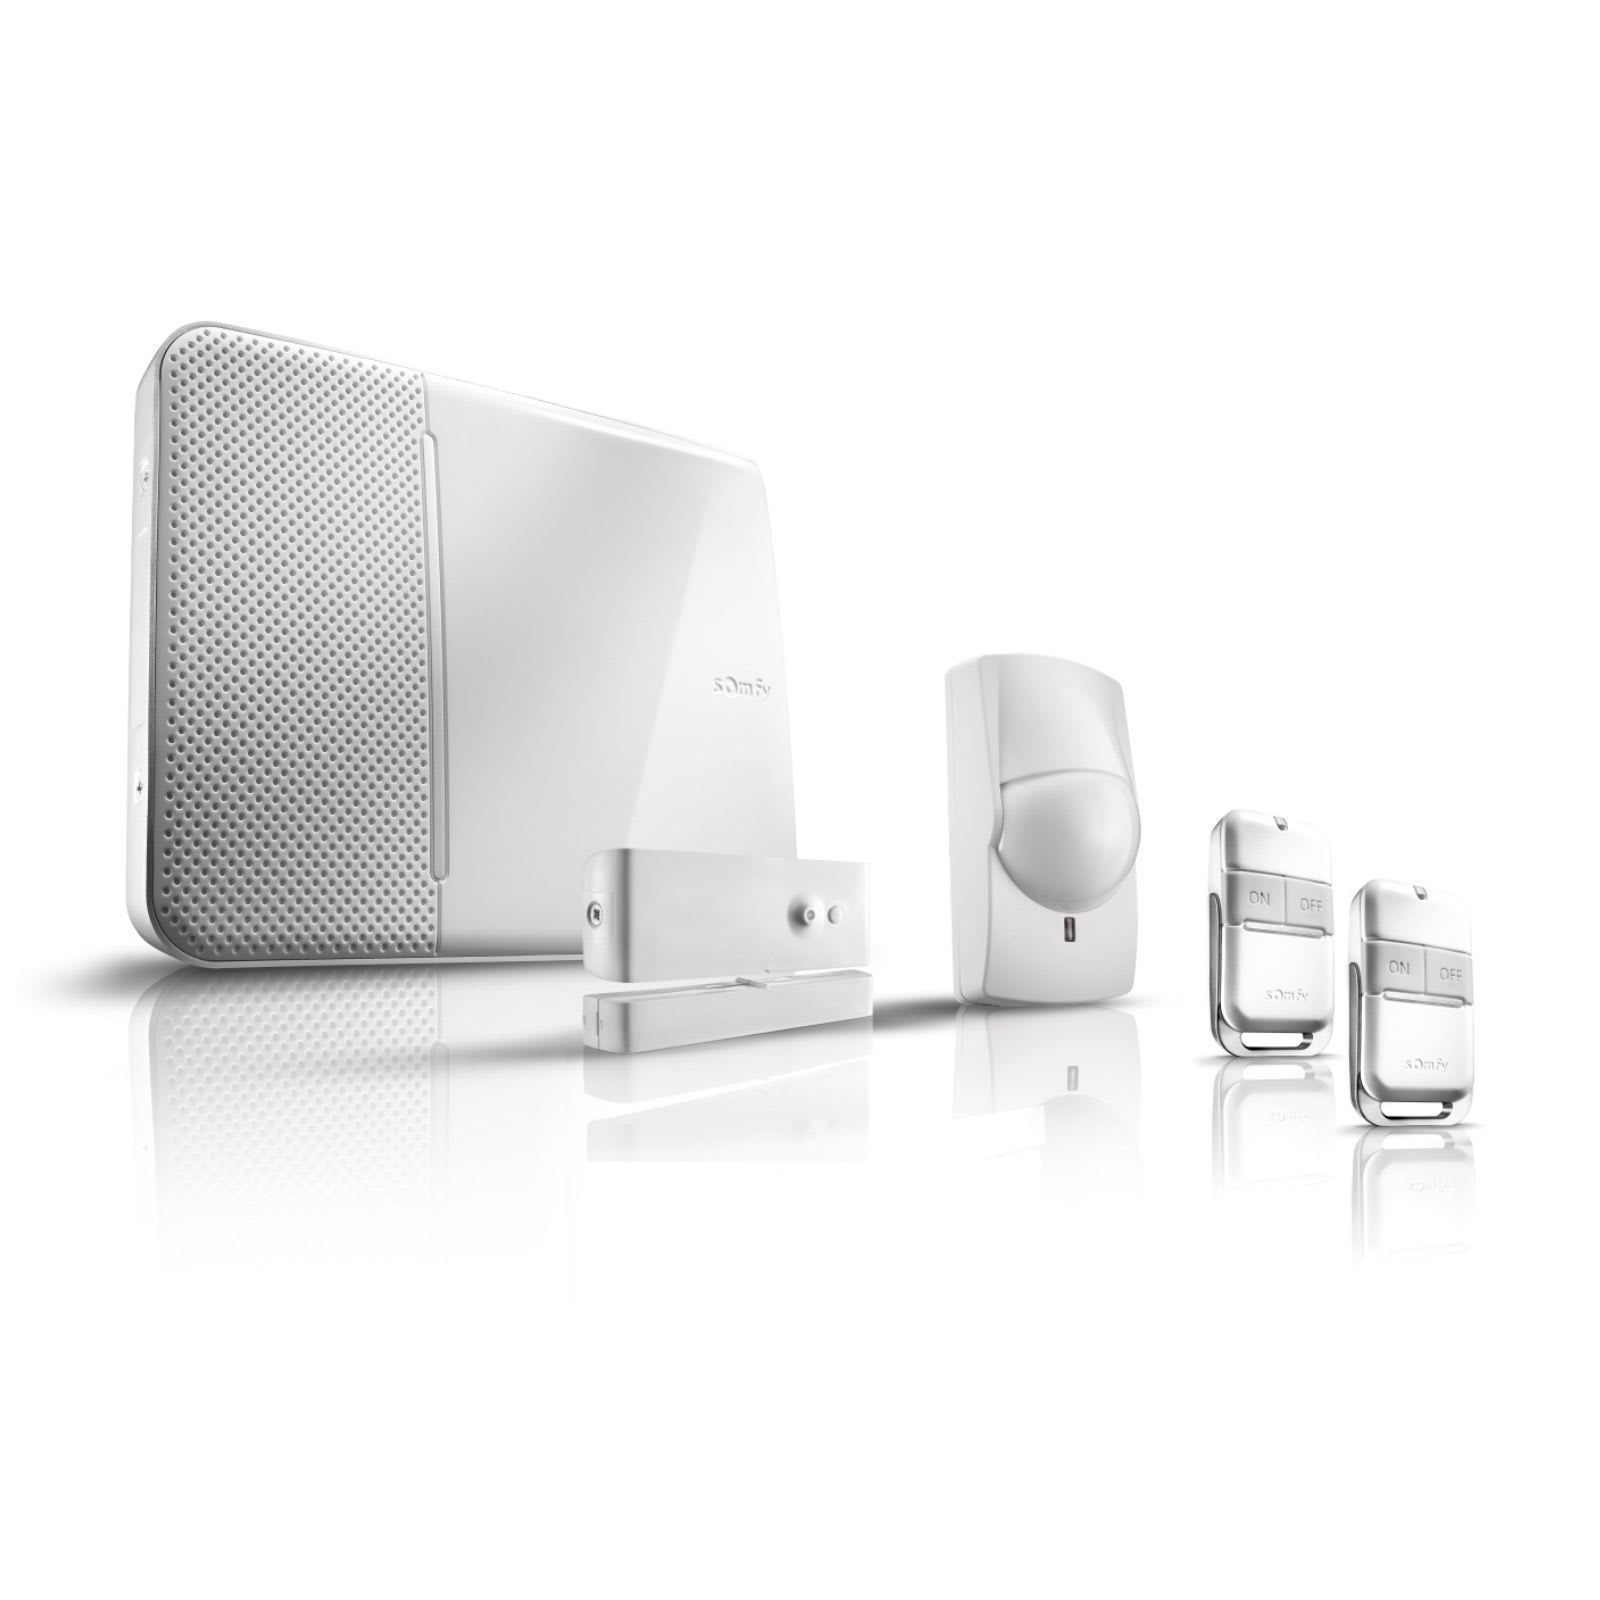 Somfy - Home keeper connect integre une centrale sirene (112 db) avec transmetteur gsm.